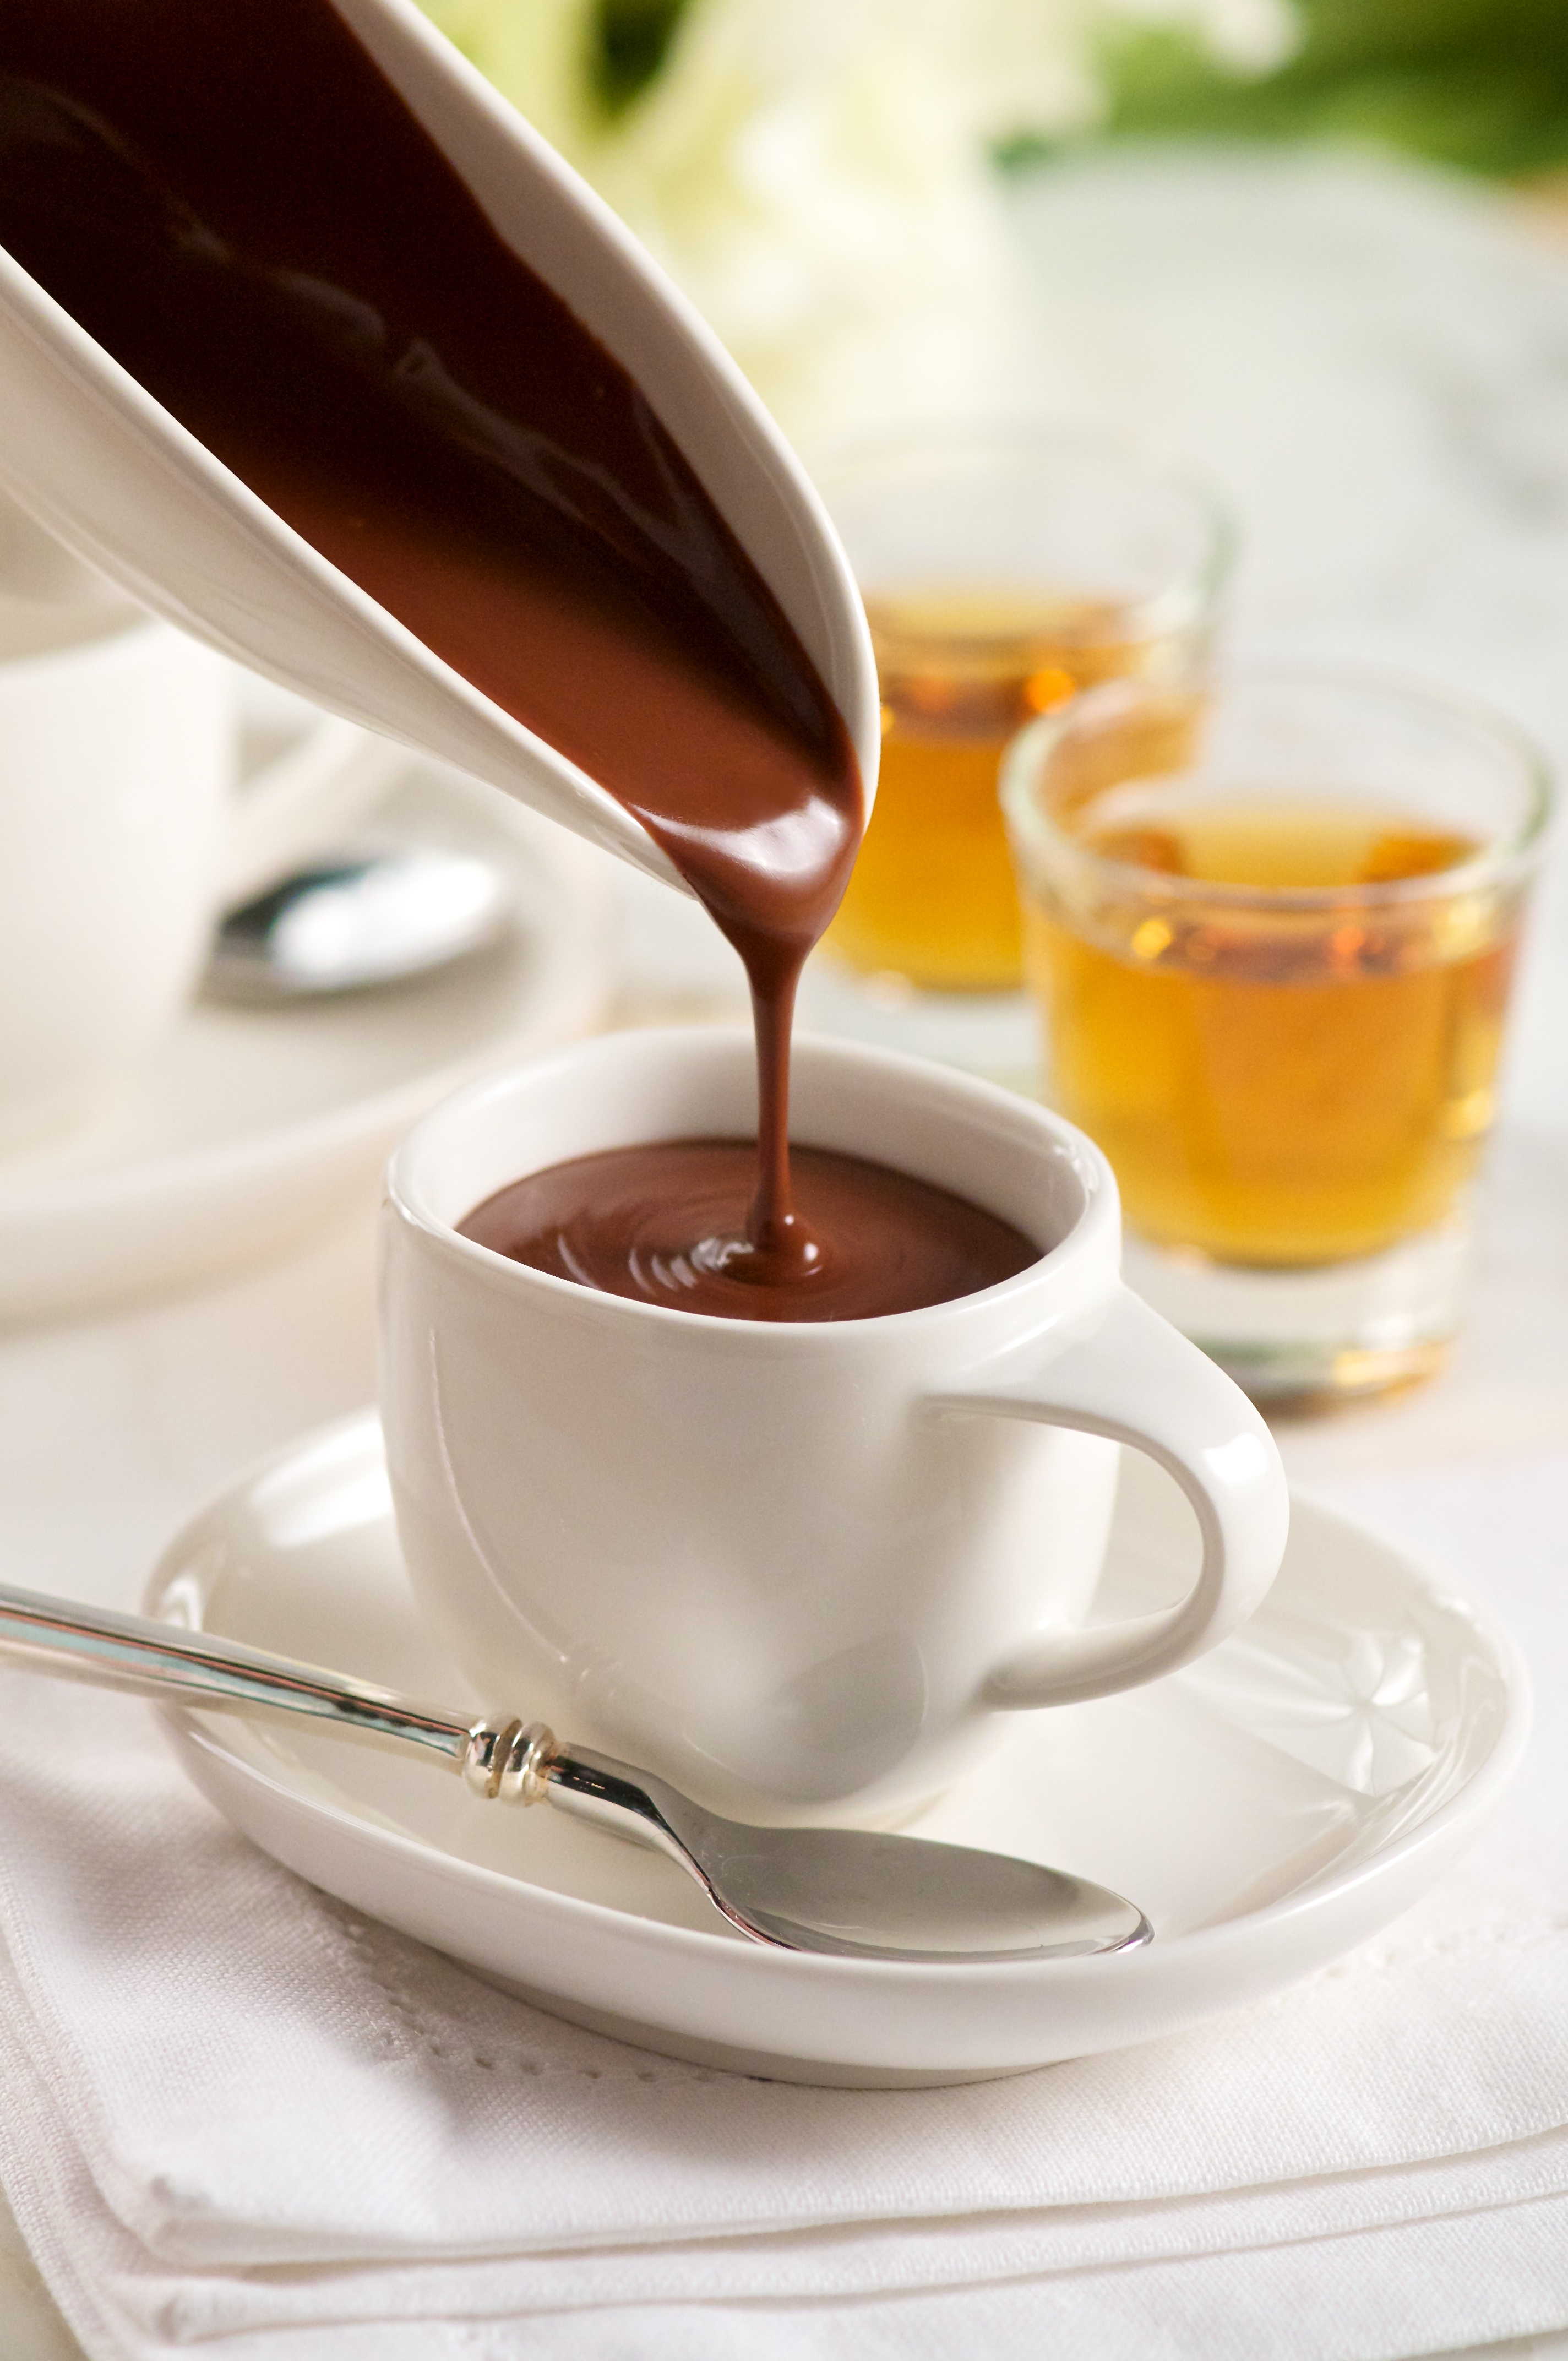 This simple recipe for two is similar in its richness to a great espresso drink. It’s a dark and decadent sipping chocolate served hot, and a little goes a long way toward creating a perfect romantic moment.